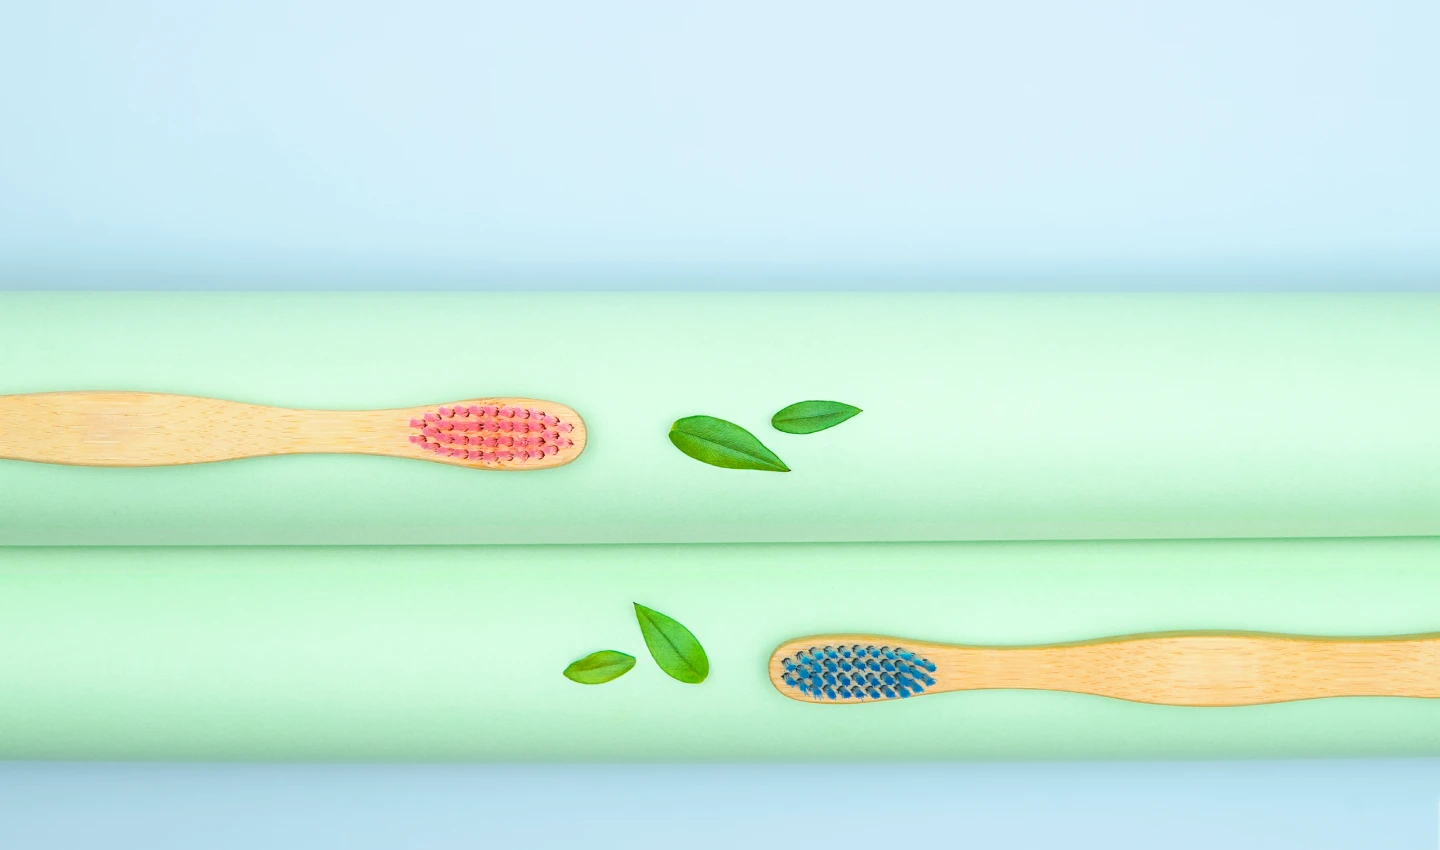 Two sensitive toothbrushes, one blue and one red, placed next to some green leaves – "Teeth-Sensitive Products